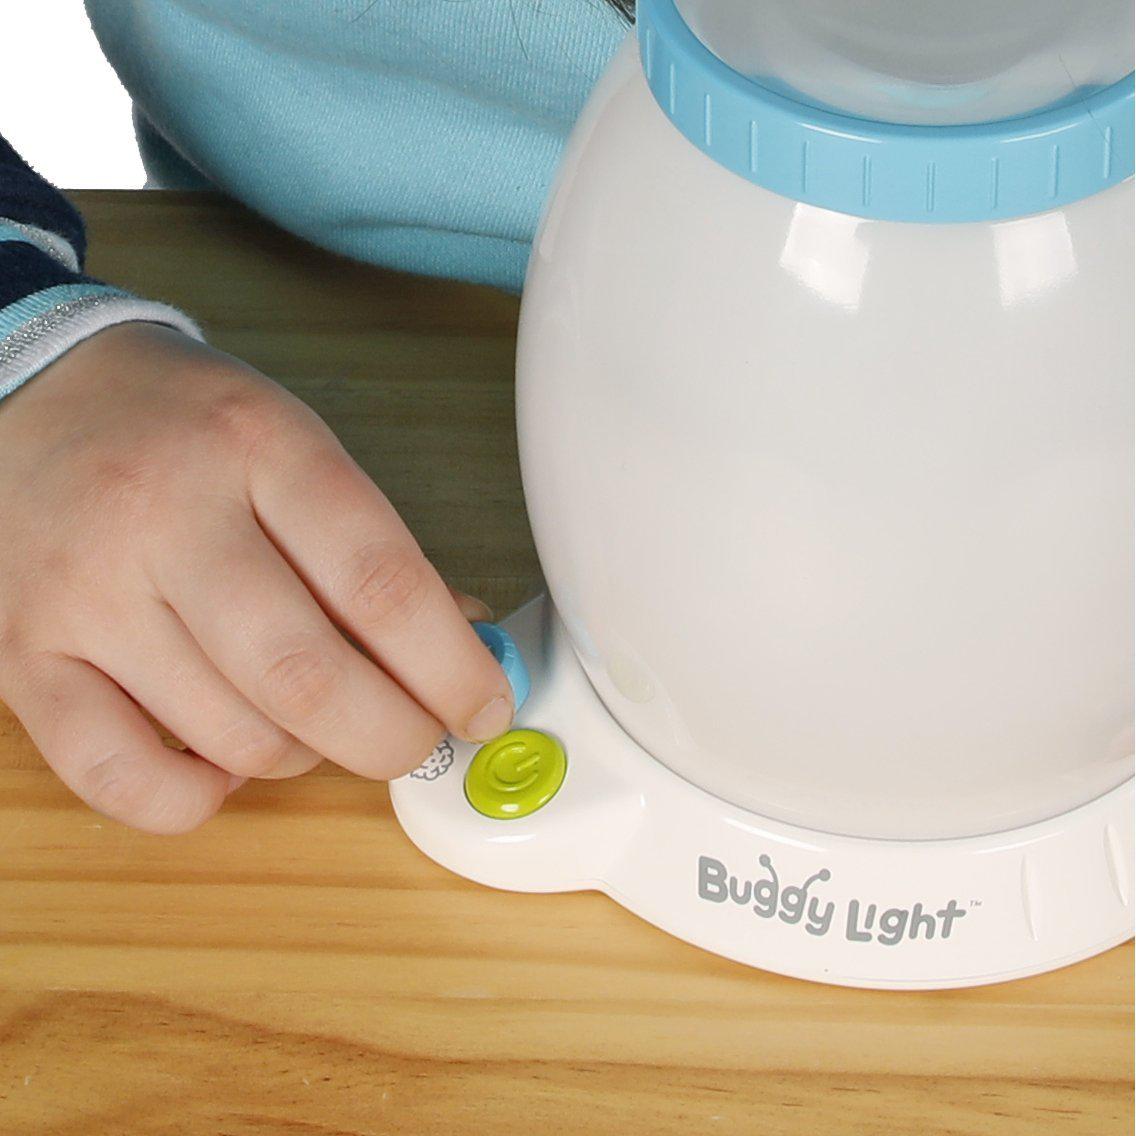 Buggy Light-Science &amp; Discovery-Fat Brain Toys-Yellow Springs Toy Company